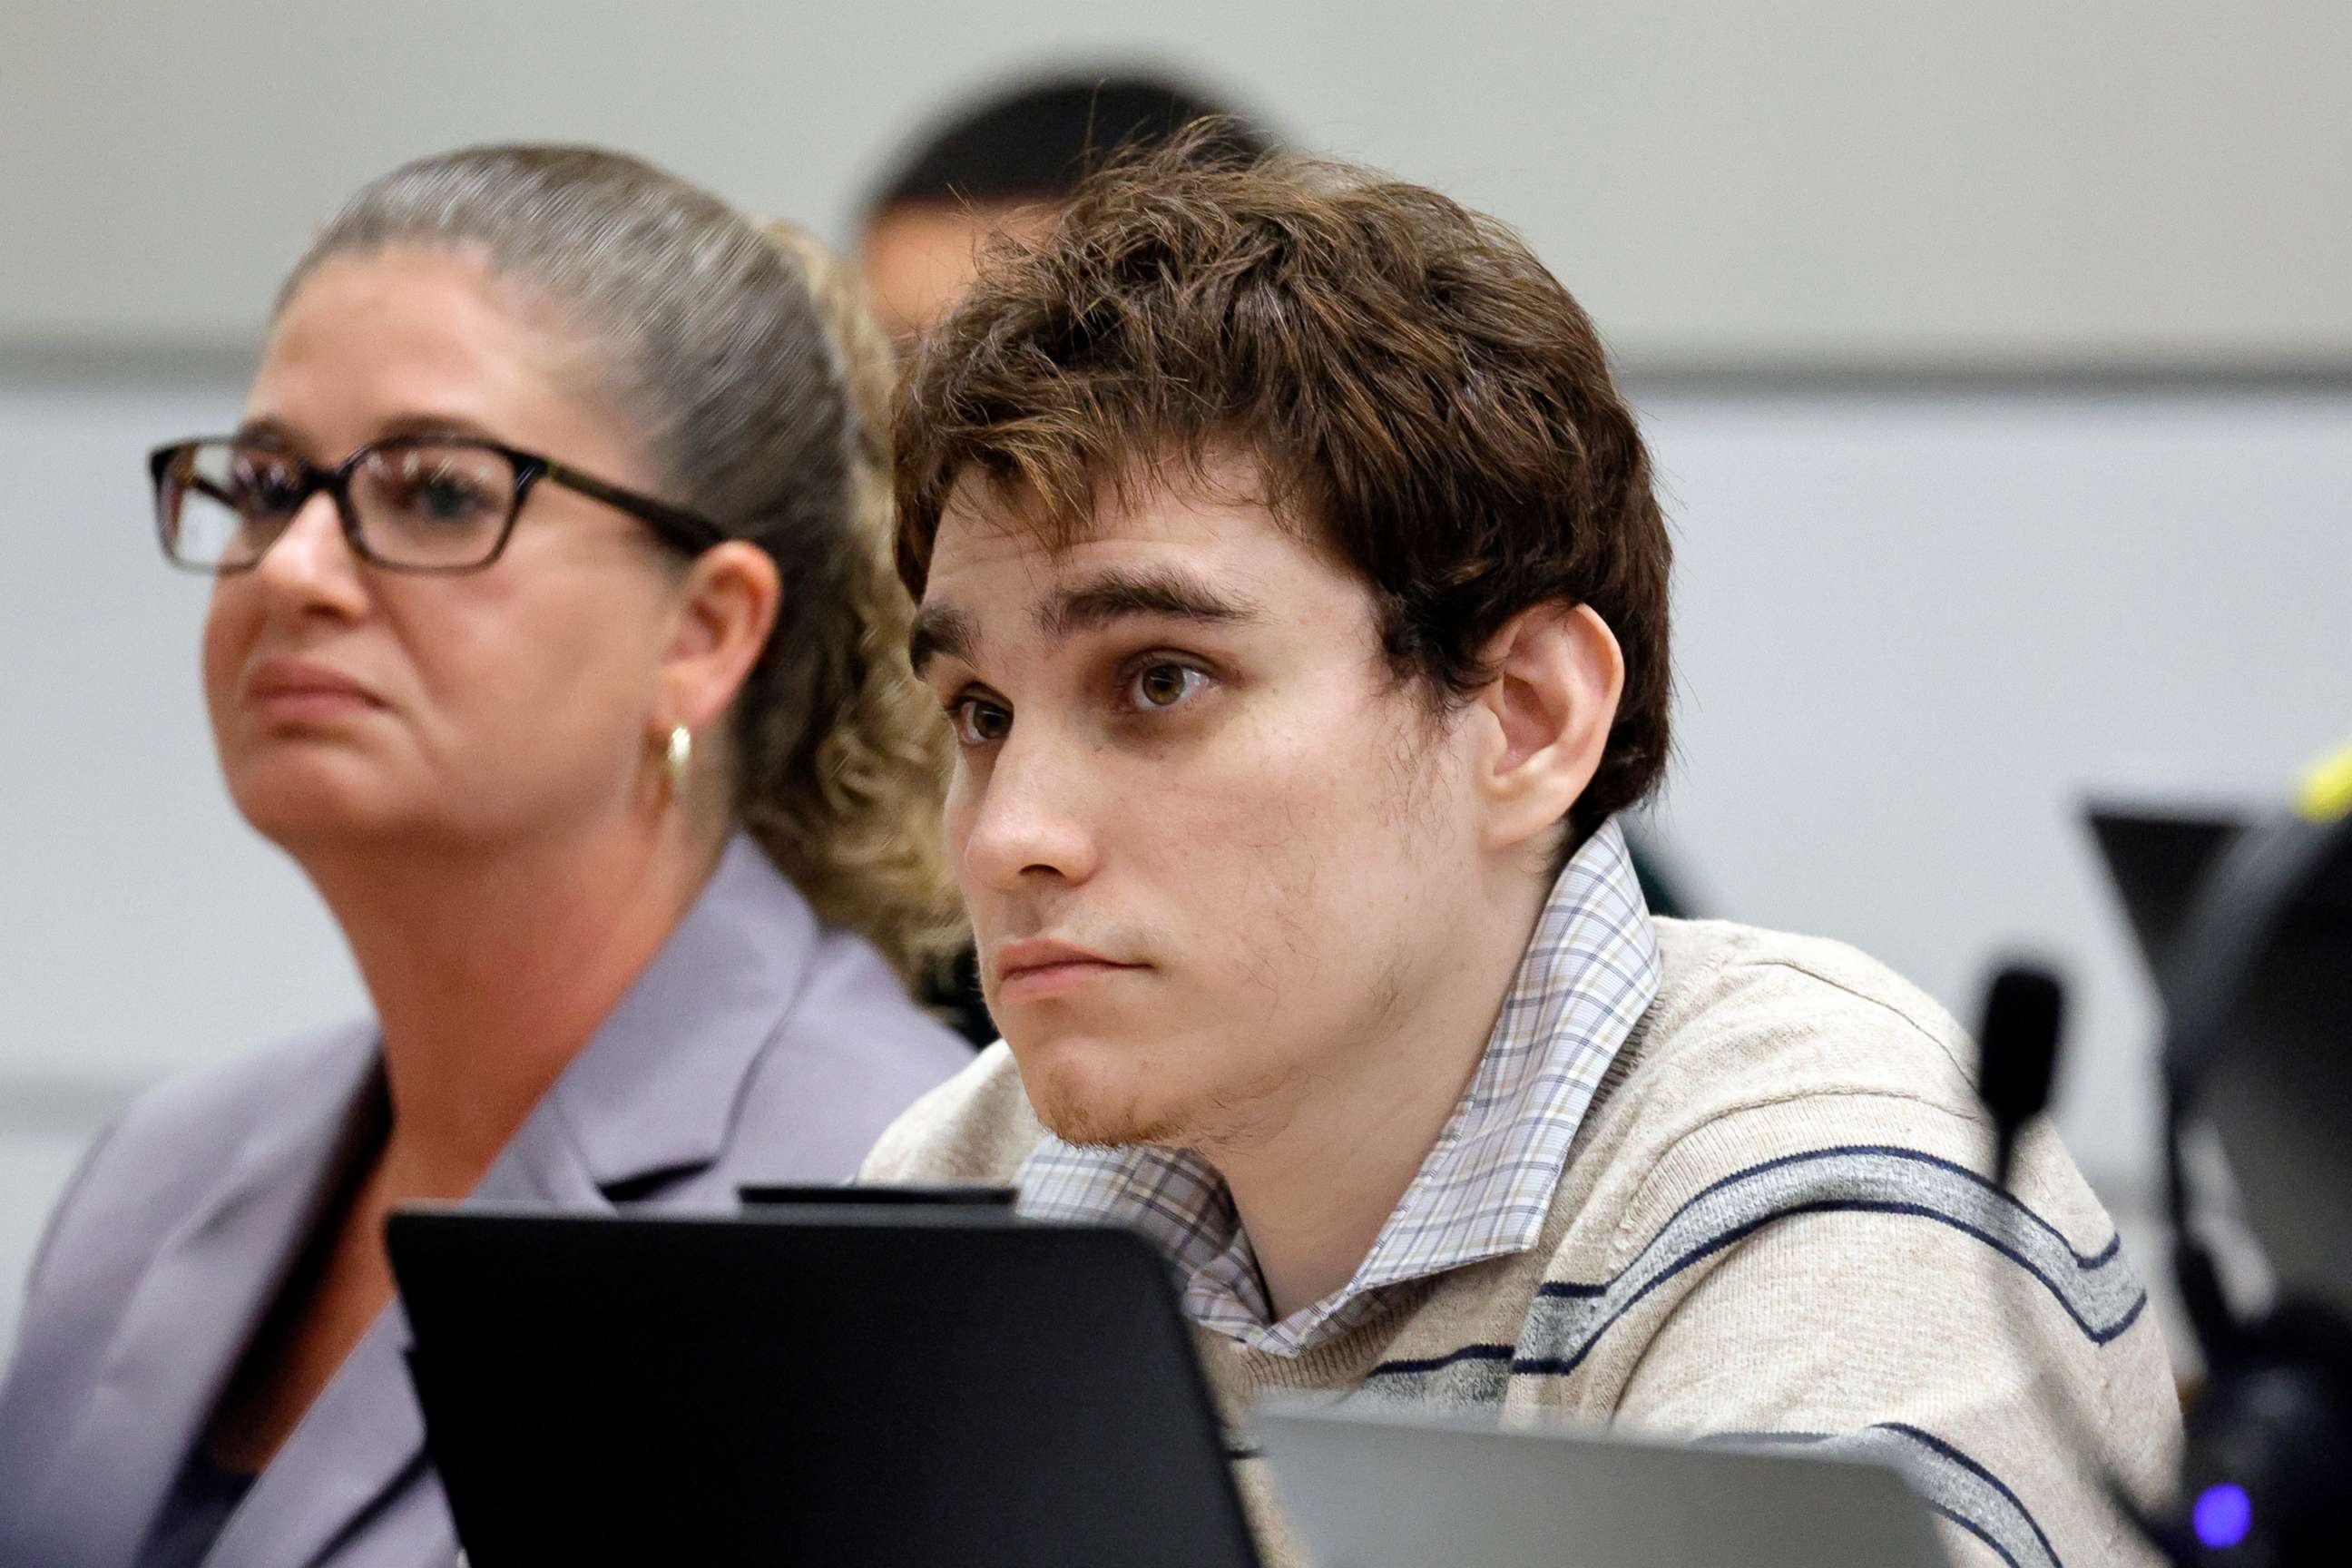 PHOTO: Marjory Stoneman Douglas High School shooter Nikolas Cruz looks up at his attorney as she gives her closing argument in the penalty phase of Cruz's trial at the Broward County Courthouse in Fort Lauderdale, Fla., Oct. 11, 2022.